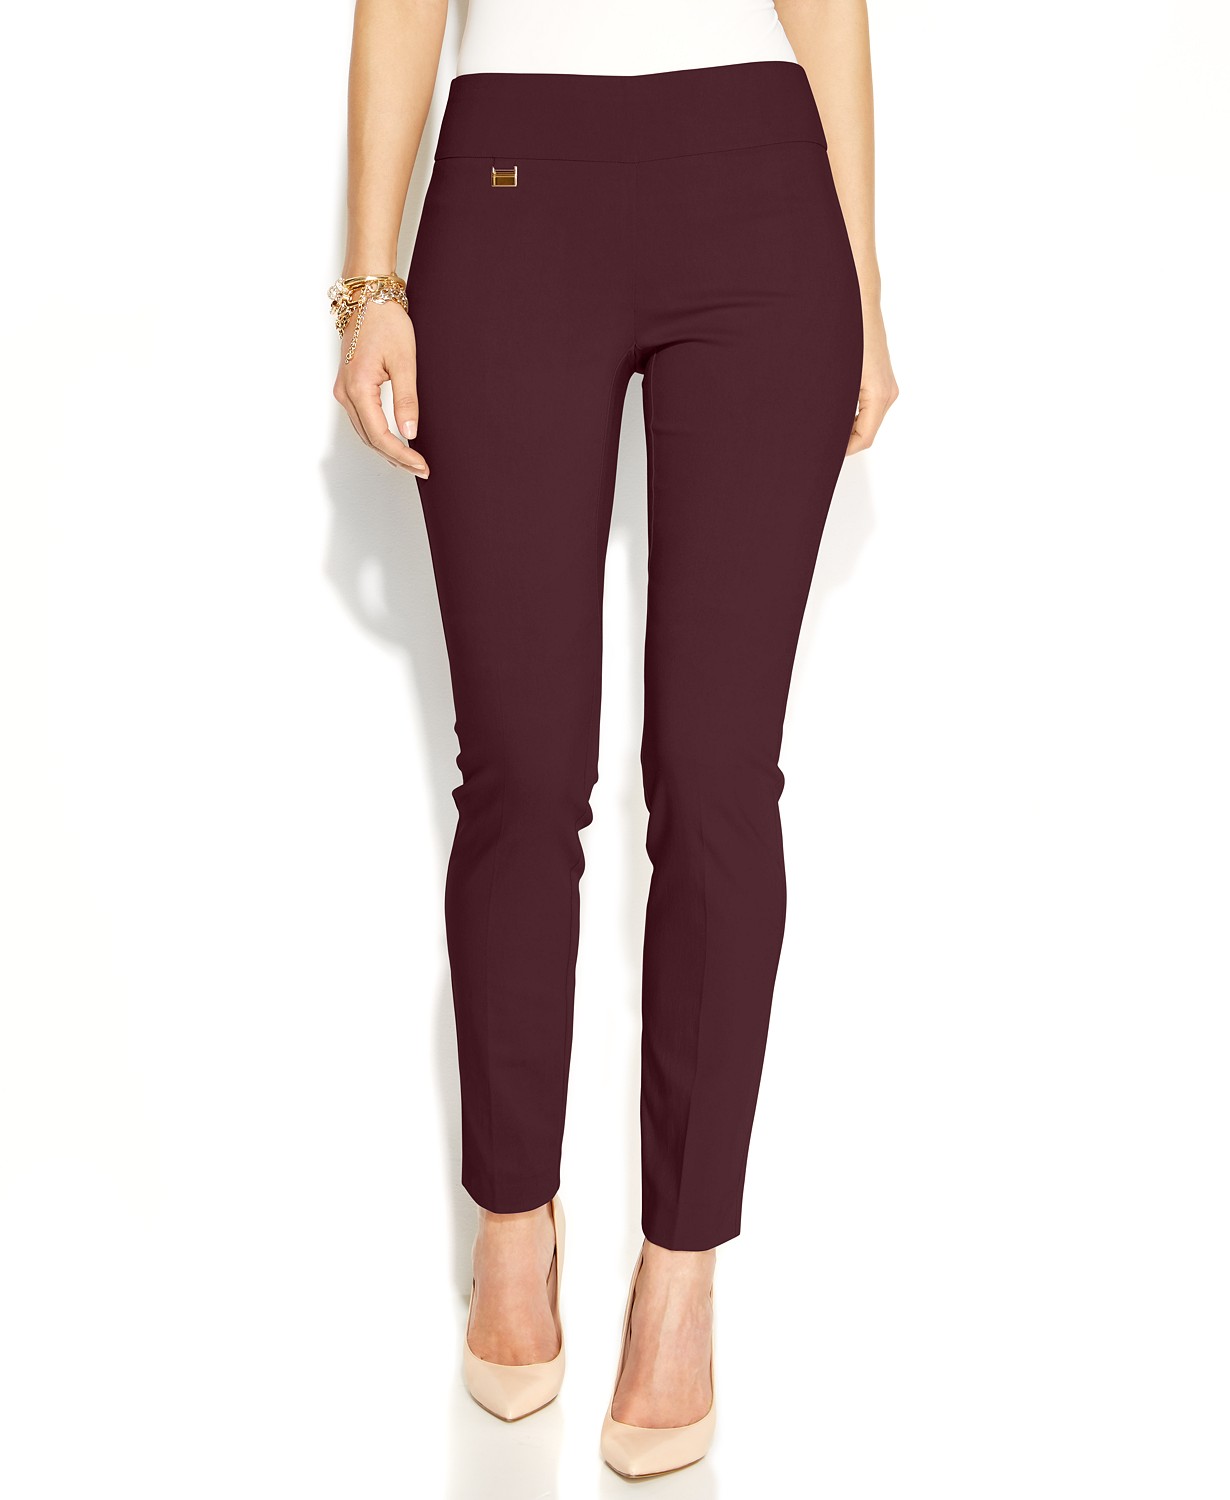 Shop Top-Rated Stomach Control Skinny Pants for Only $40